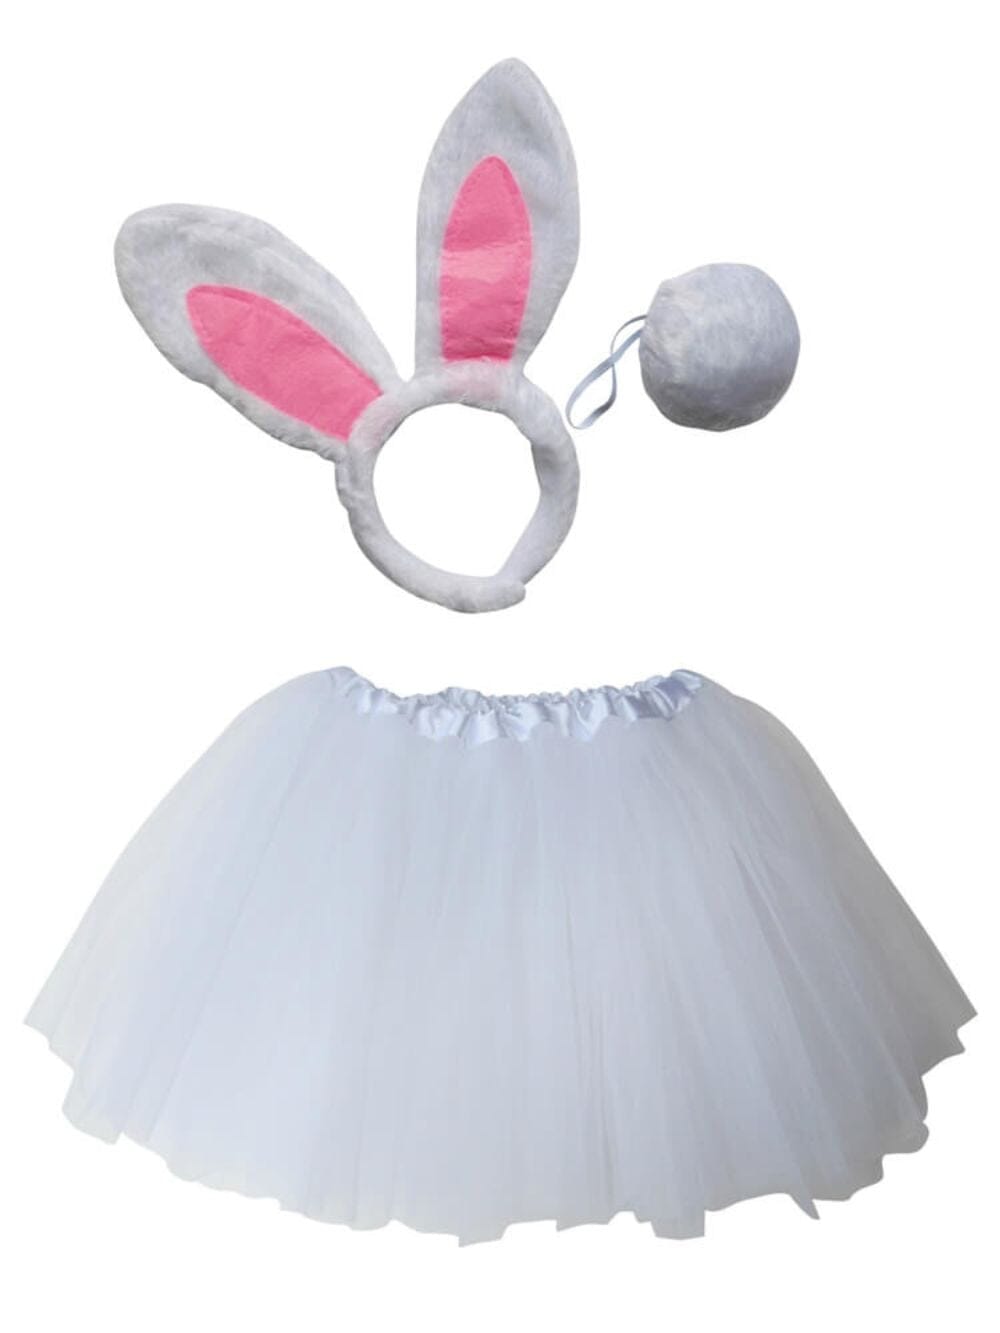 Girls White Rabbit Costume - Complete Kids Bunny Costume Set with Tutu, Tail, & Ears - Sydney So Sweet